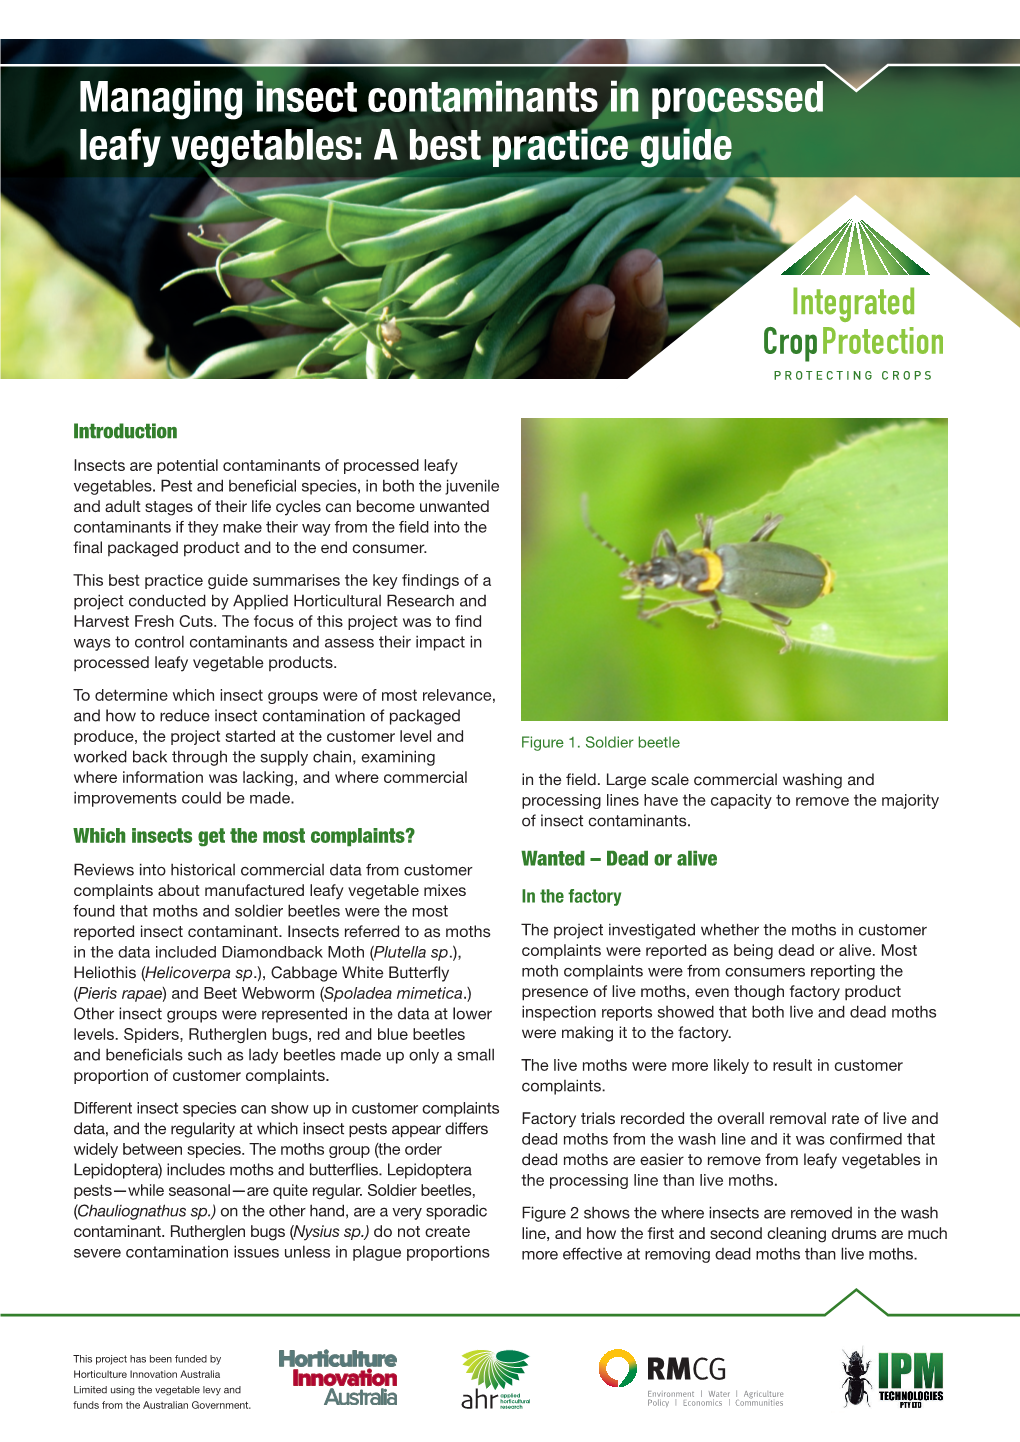 Managing Insect Contaminants in Processed Leafy Vegetables: a Best Practice Guide